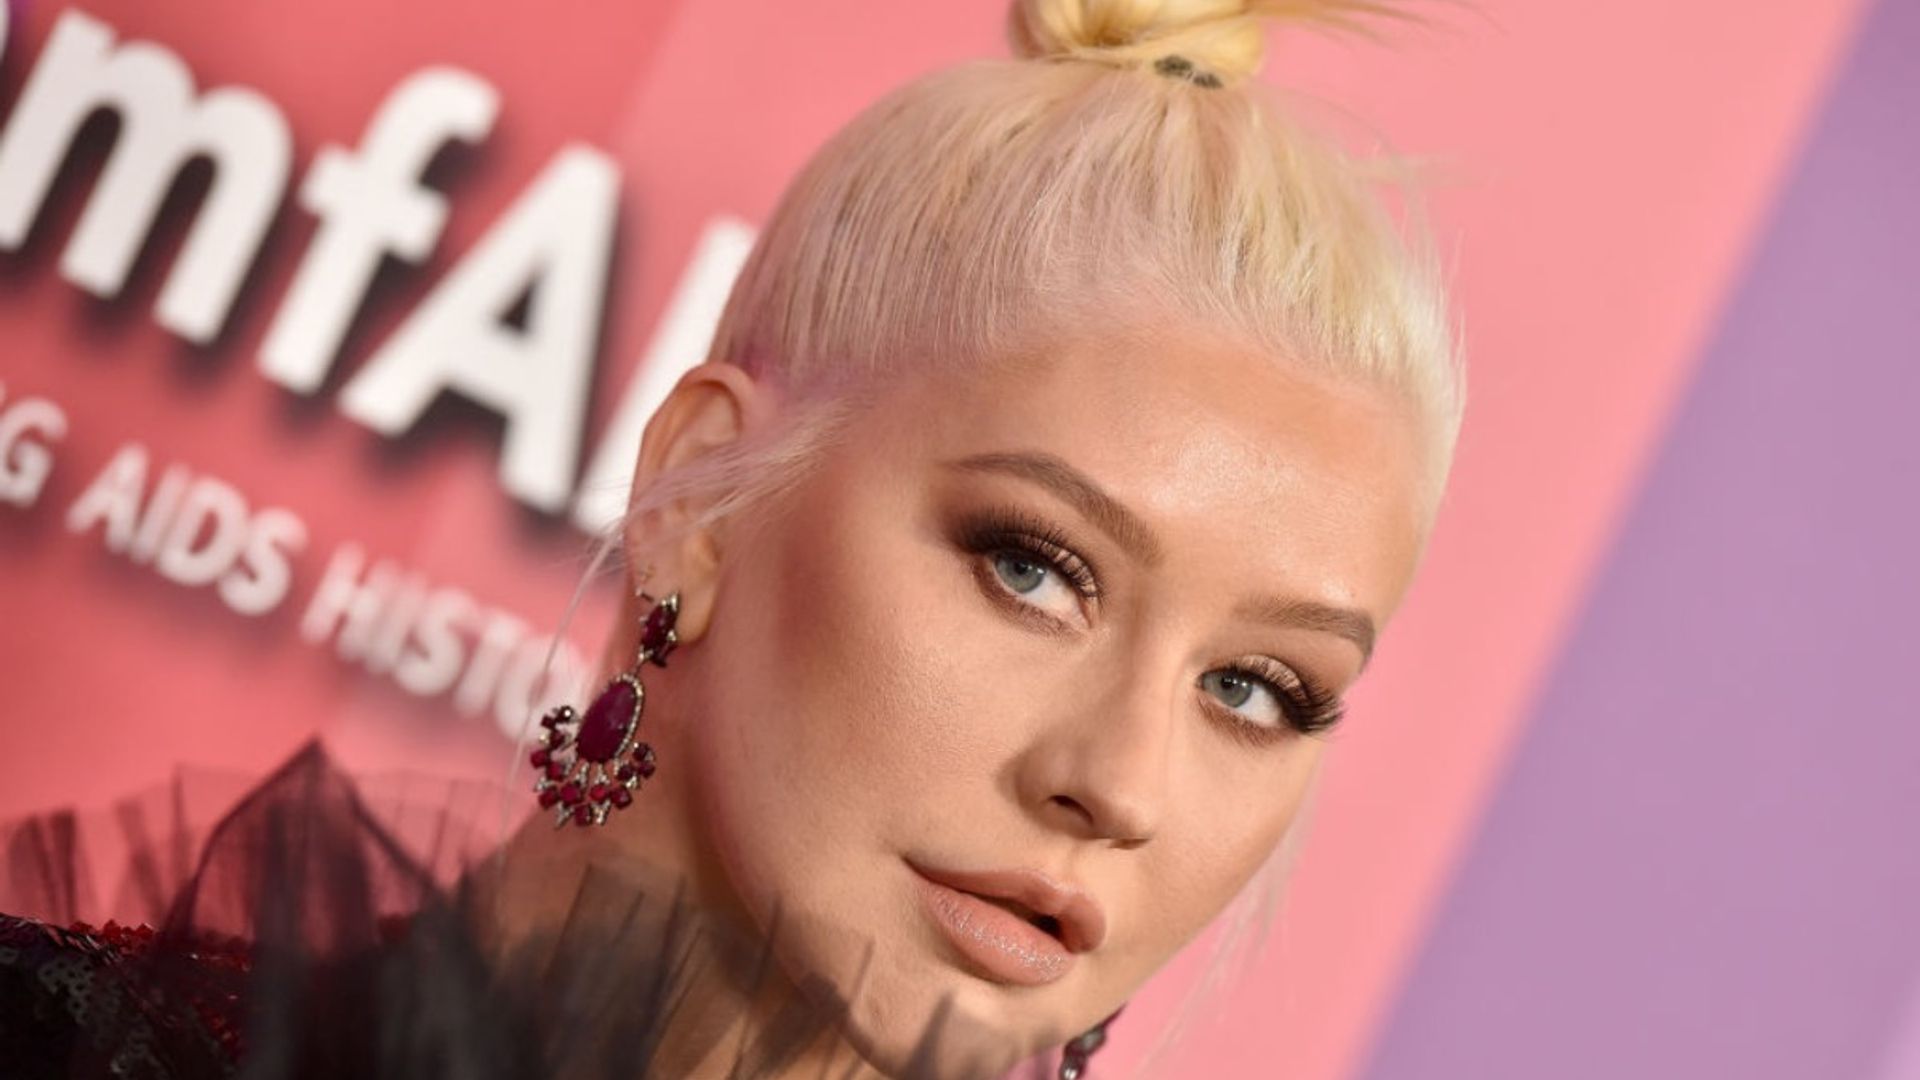 Christina Aguilera reveals her real hair colour in never-before-seen family photos